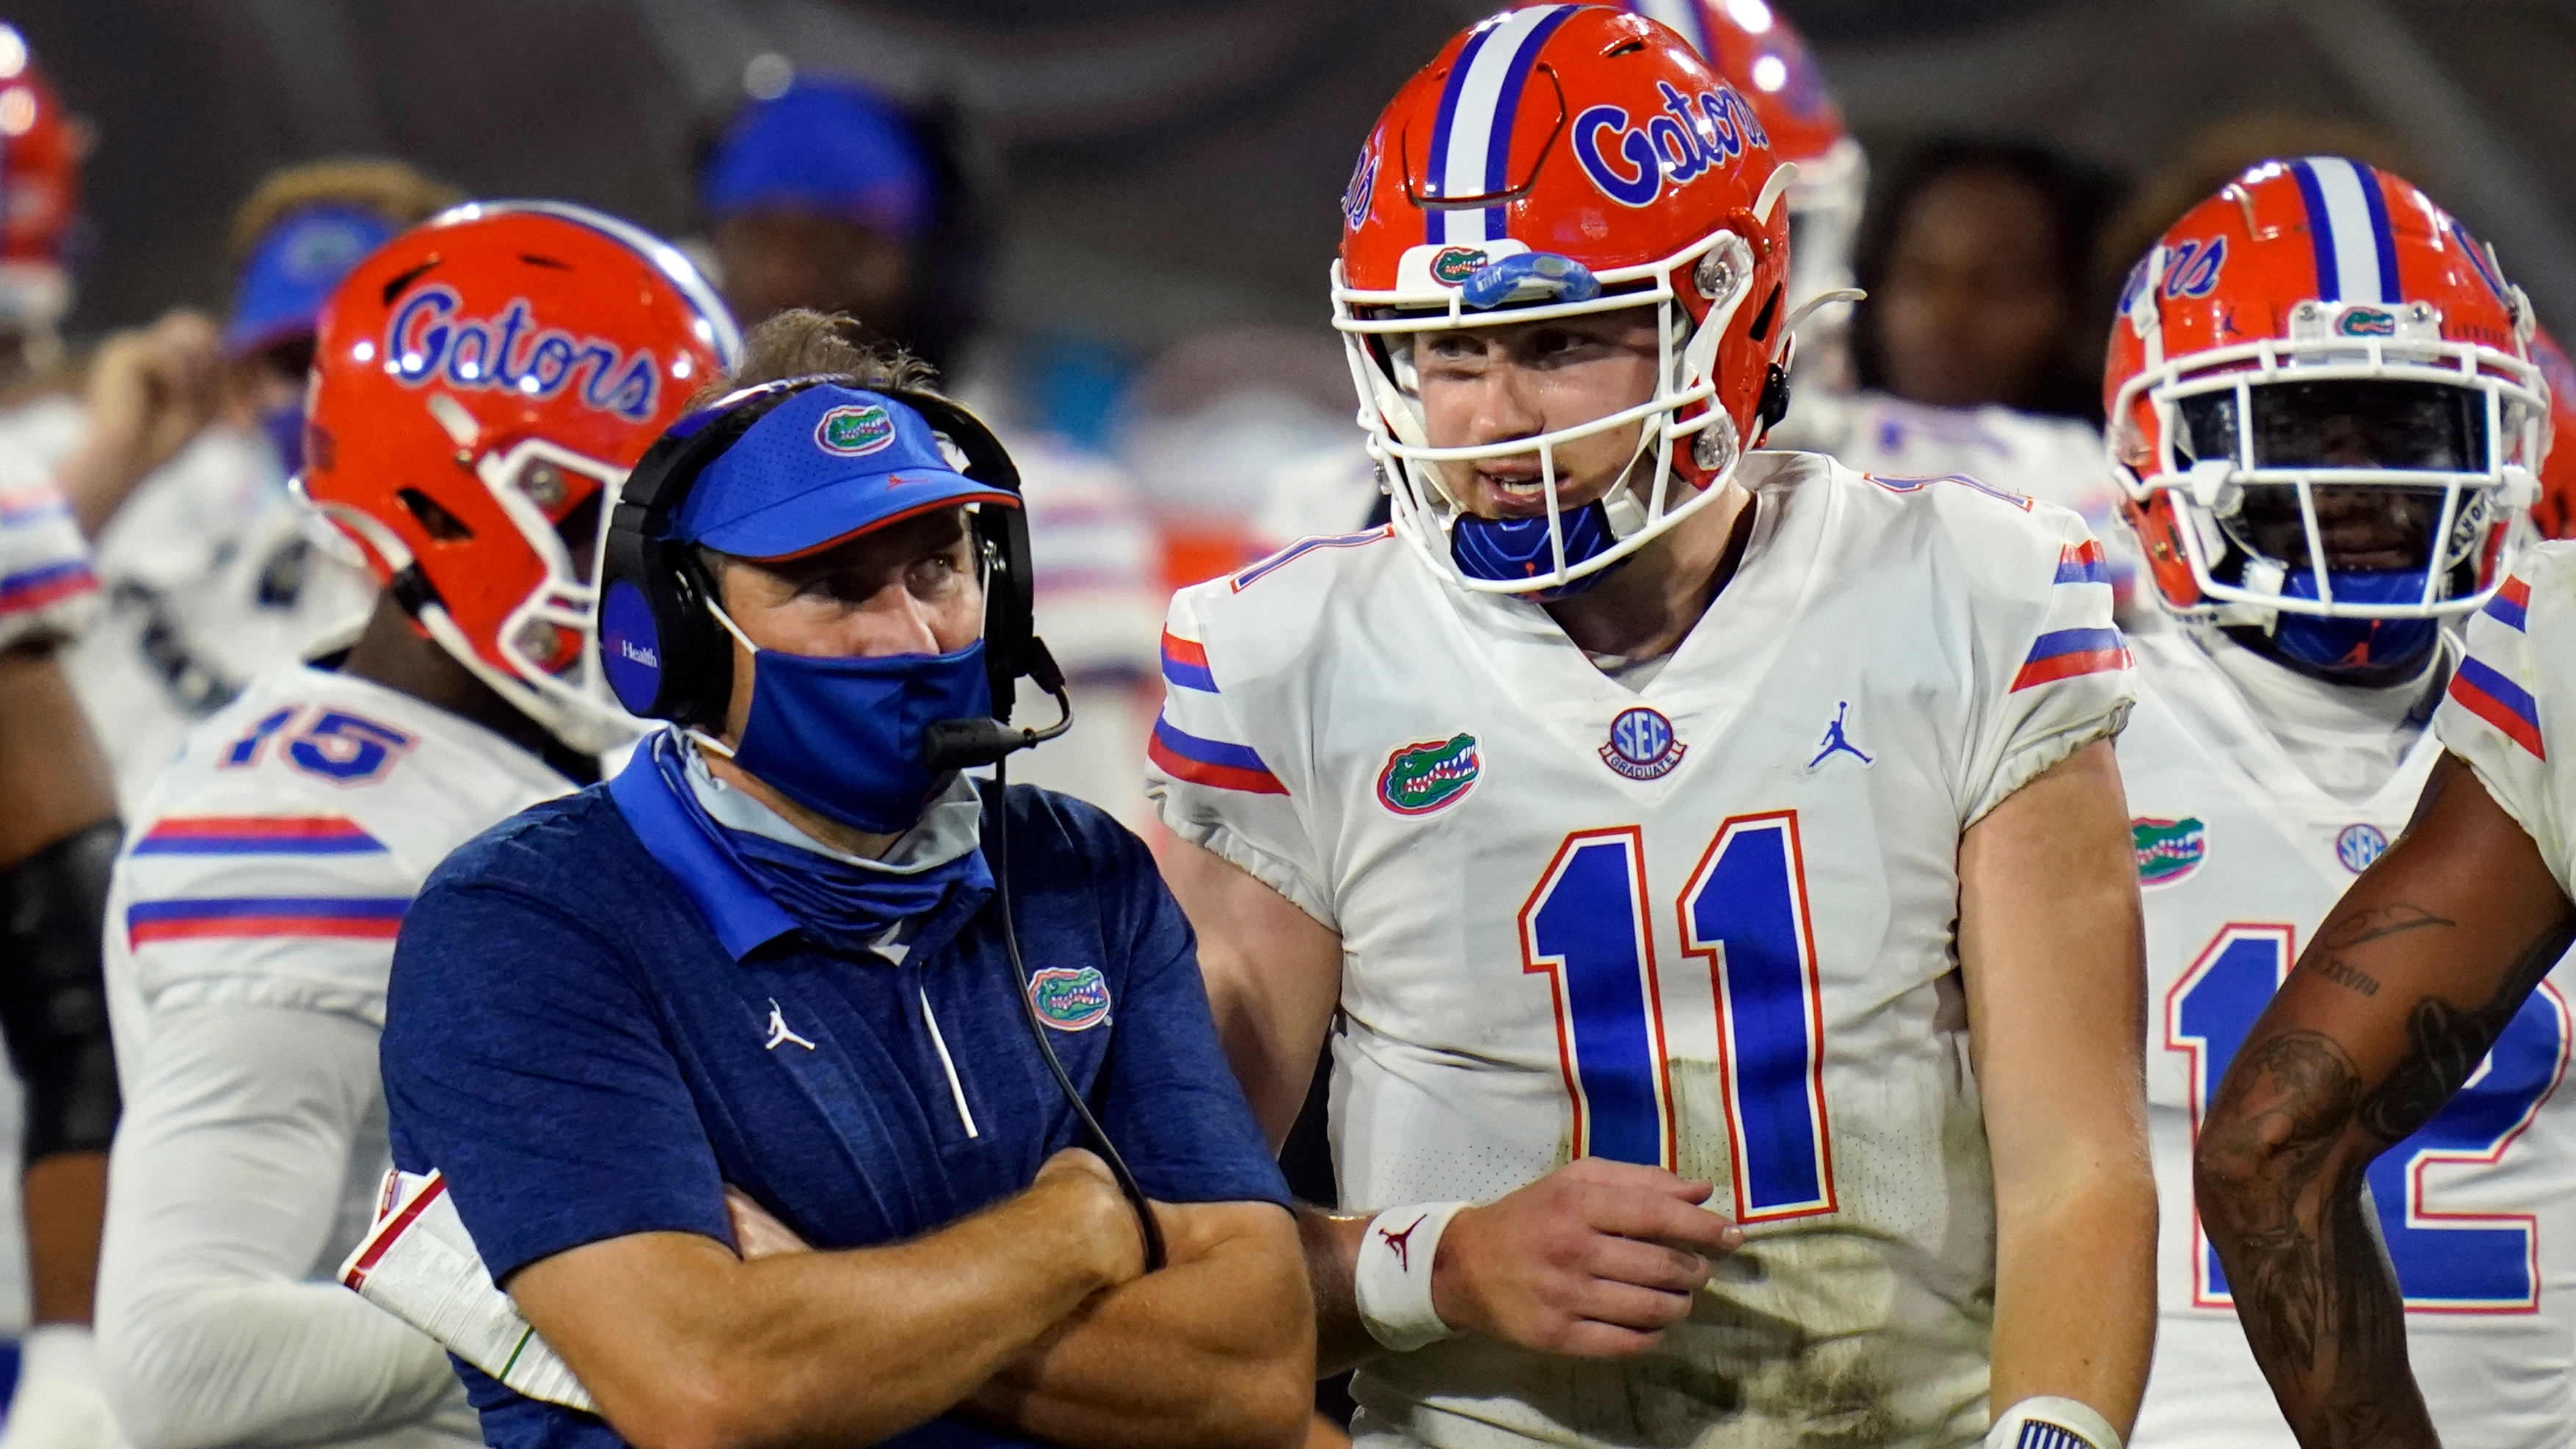 Dan Mullen As Nfl Coach Why Teams Might Might Not Be Interested In Florida Gators Leader - bull quarterback brawl stars